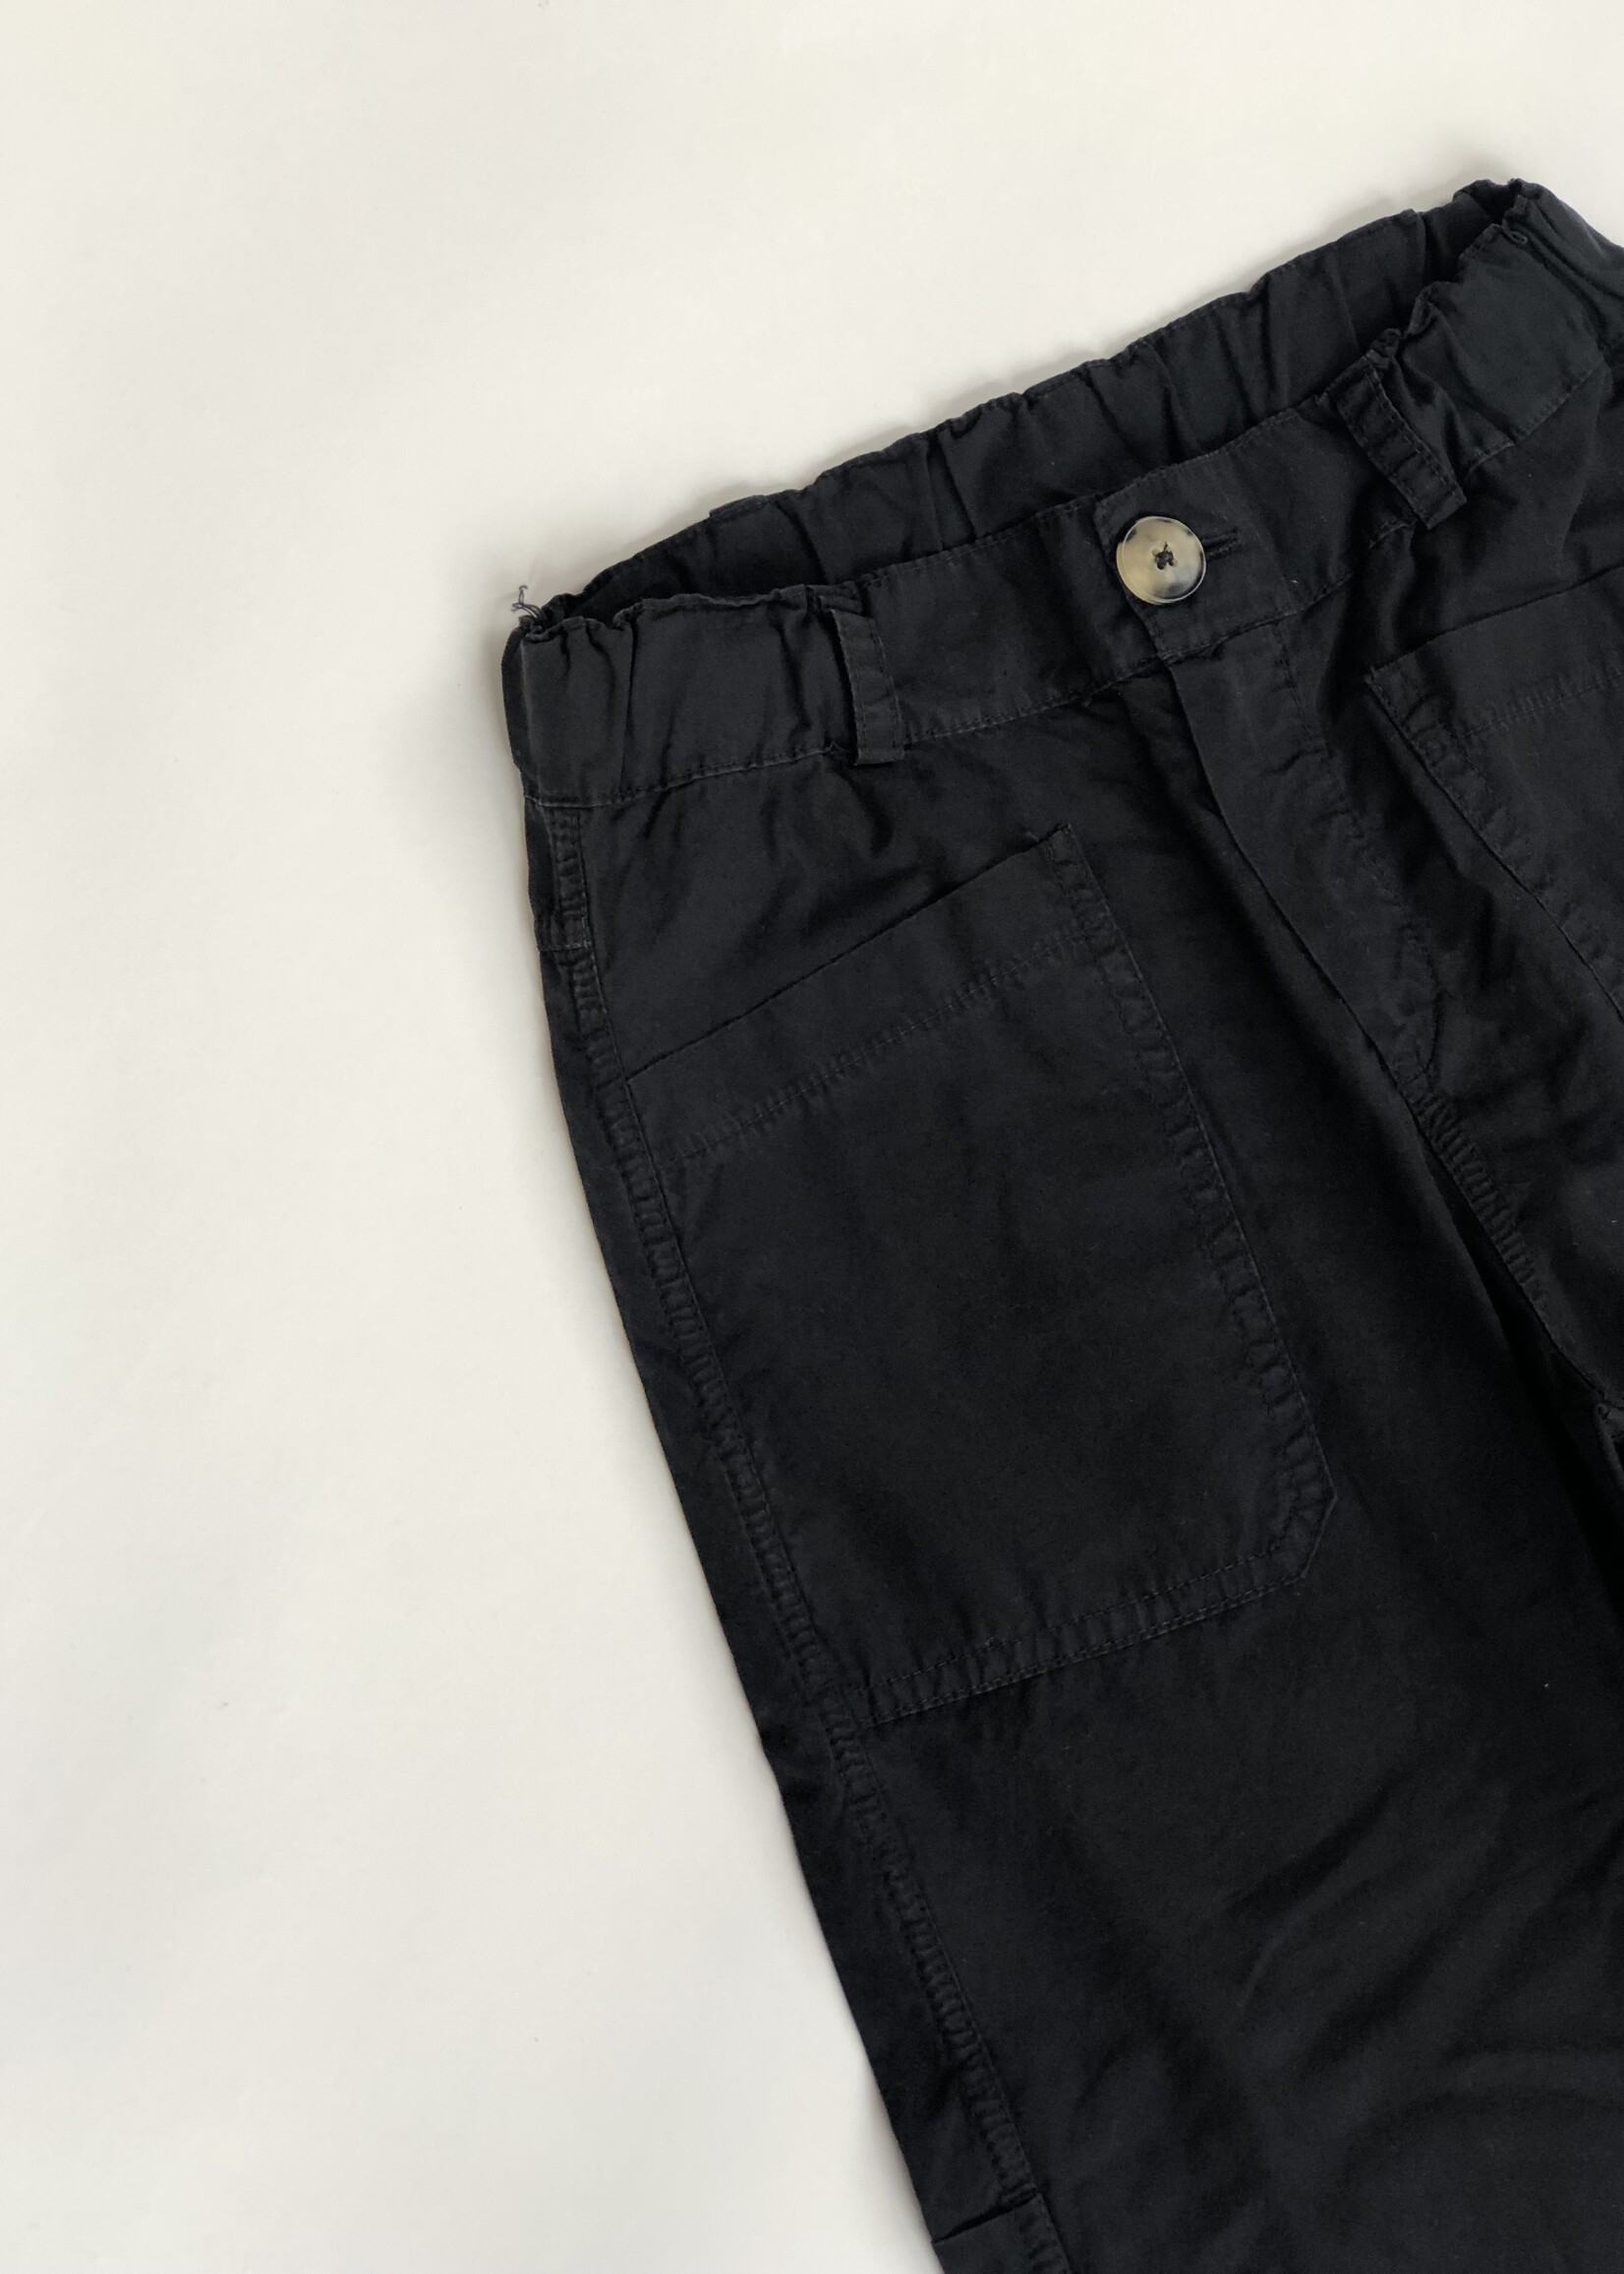 Long Live The Queen Dark blue wide fit pants 8y